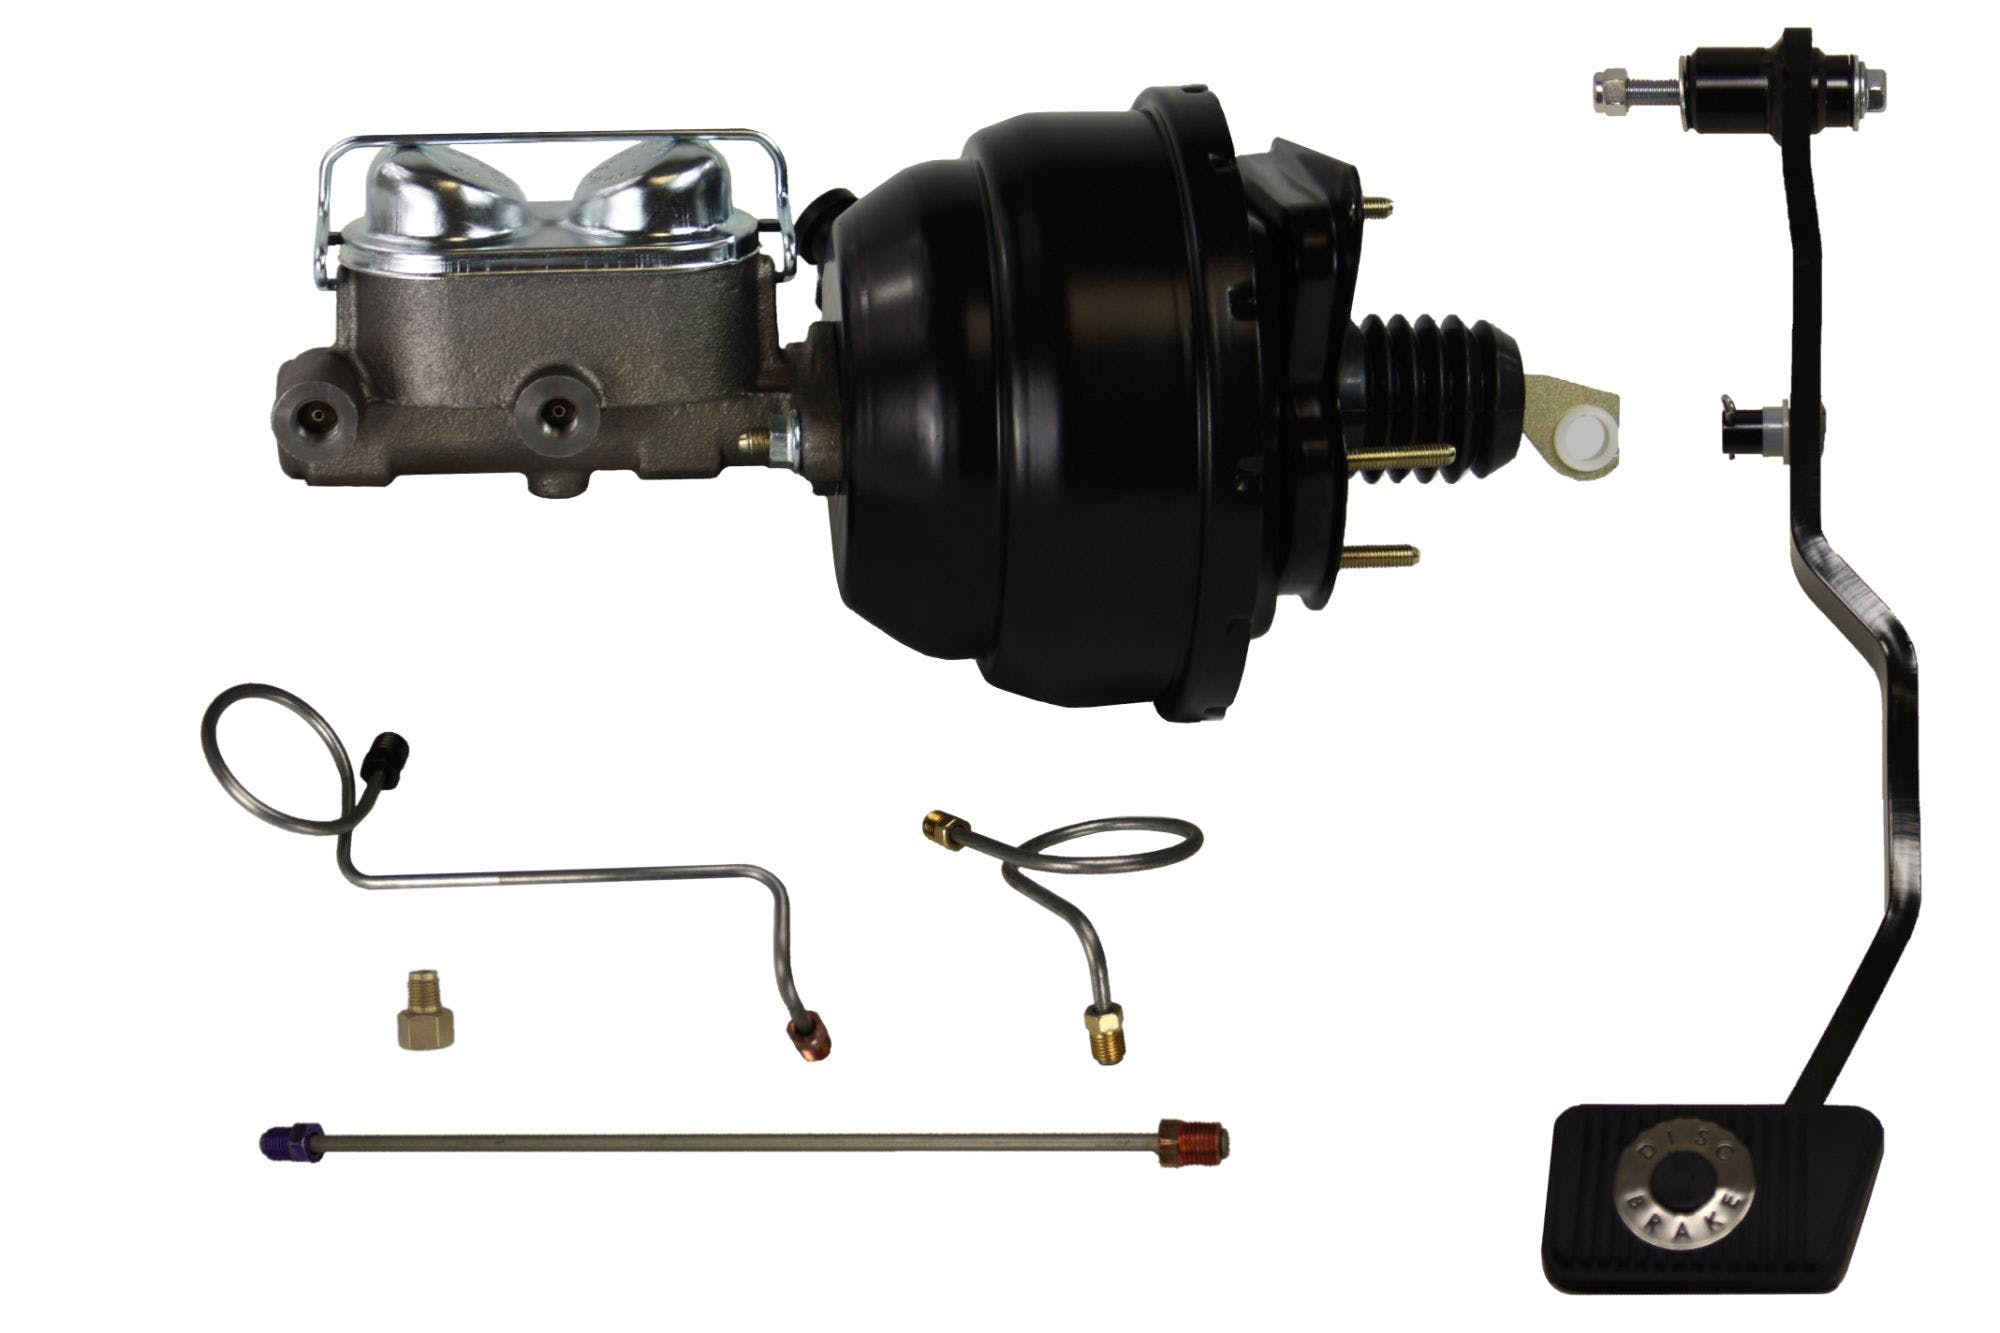 LEED Brakes FC0038HK Hydraulic Kit, Power Drum Brakes, 8 inch Dual Diaphragm Booster Cast Iron Master Cyl